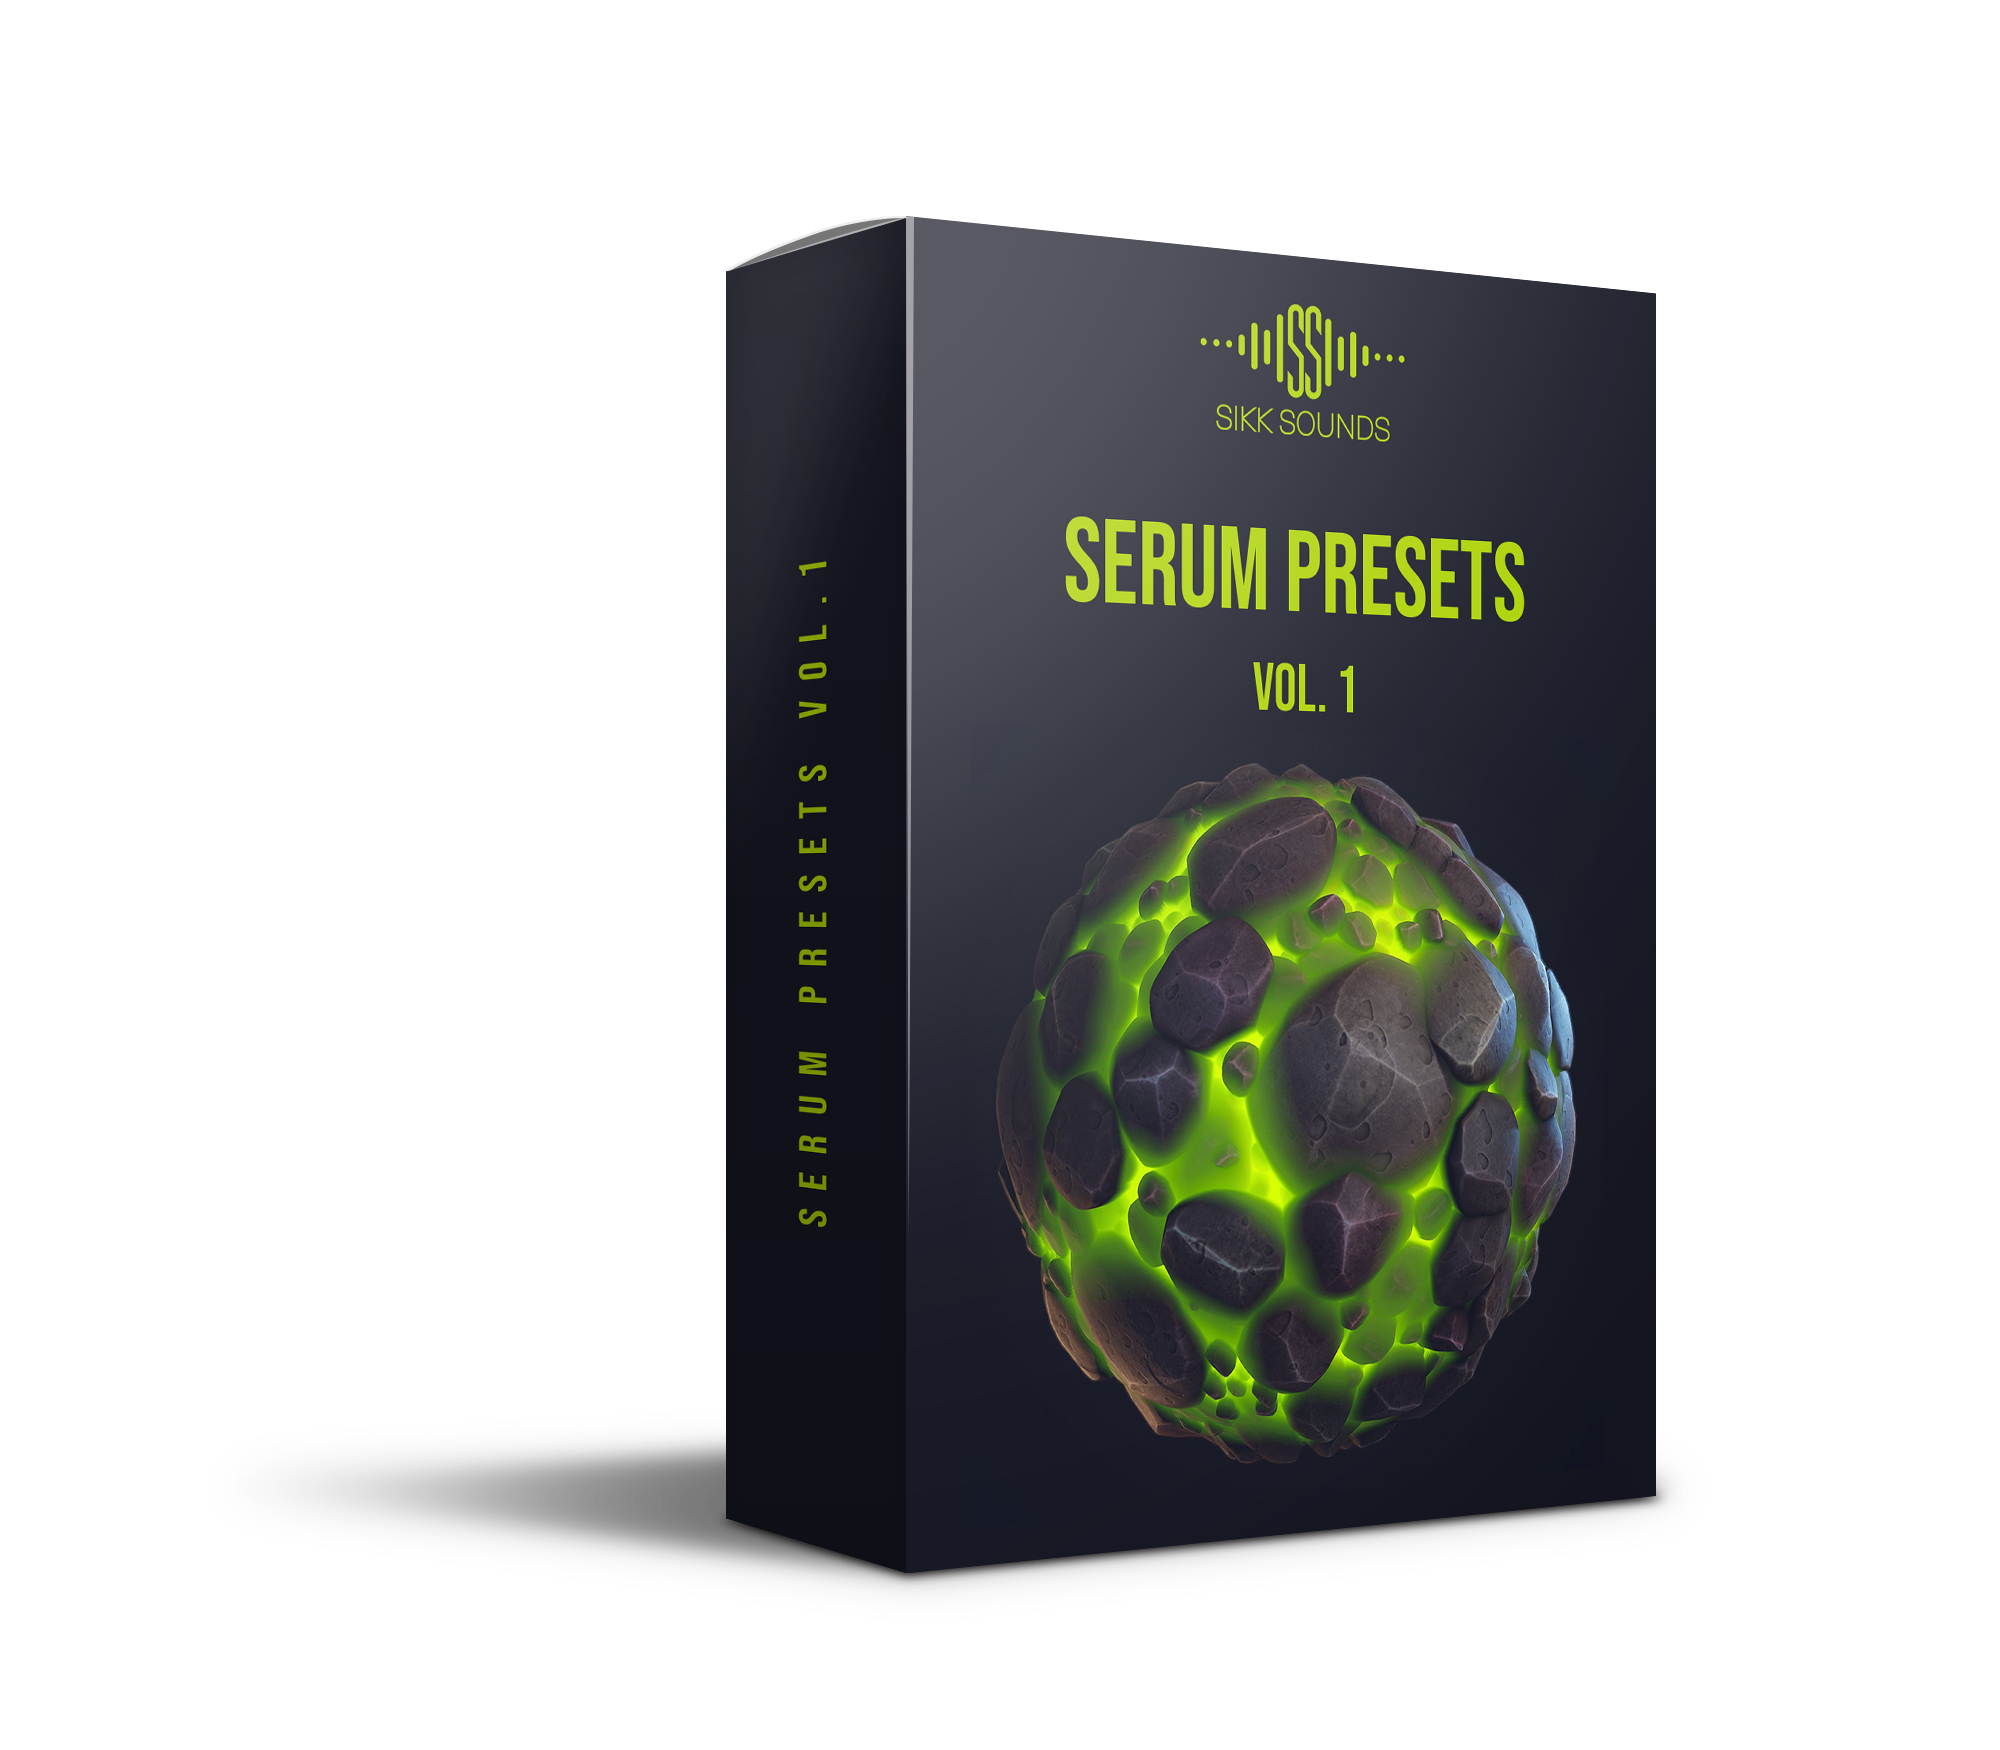 Sikk Sounds Serum Presets Vol.1: Elevate Your Music Production